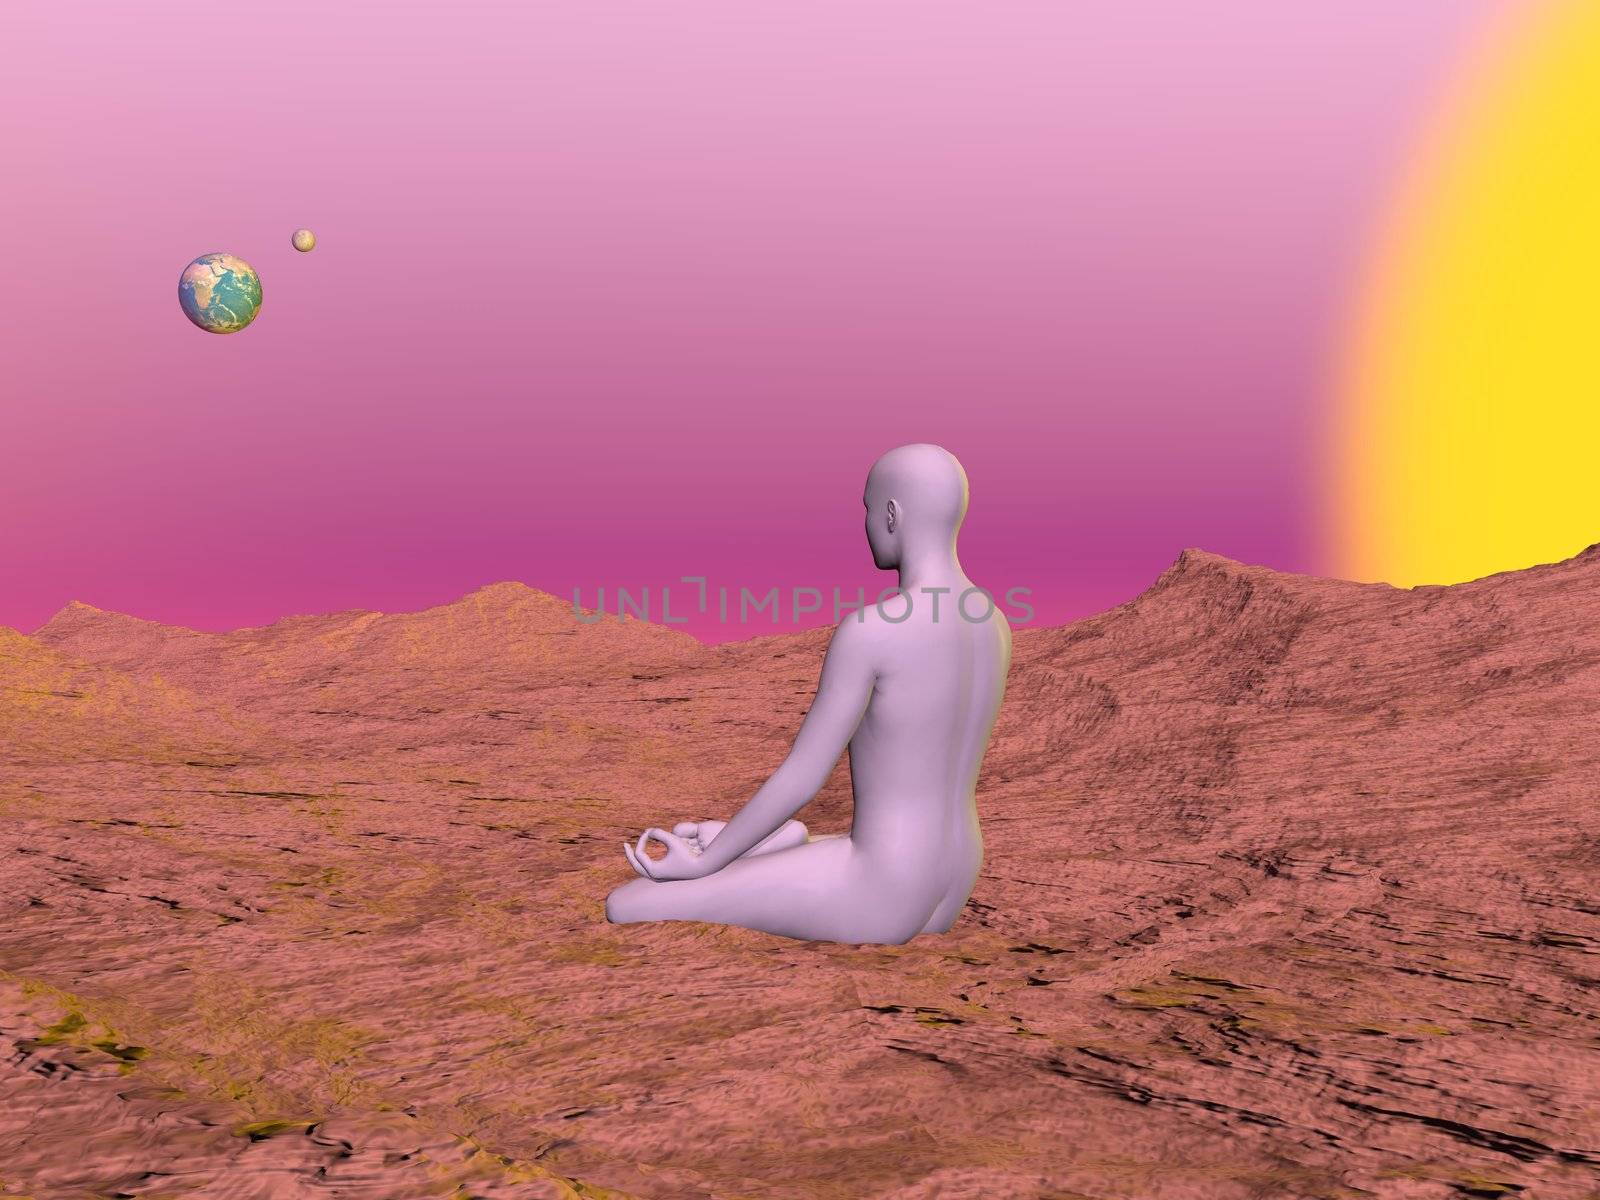 Human meditation sitting in lotus posture on mars and looking at the earth and moon planets